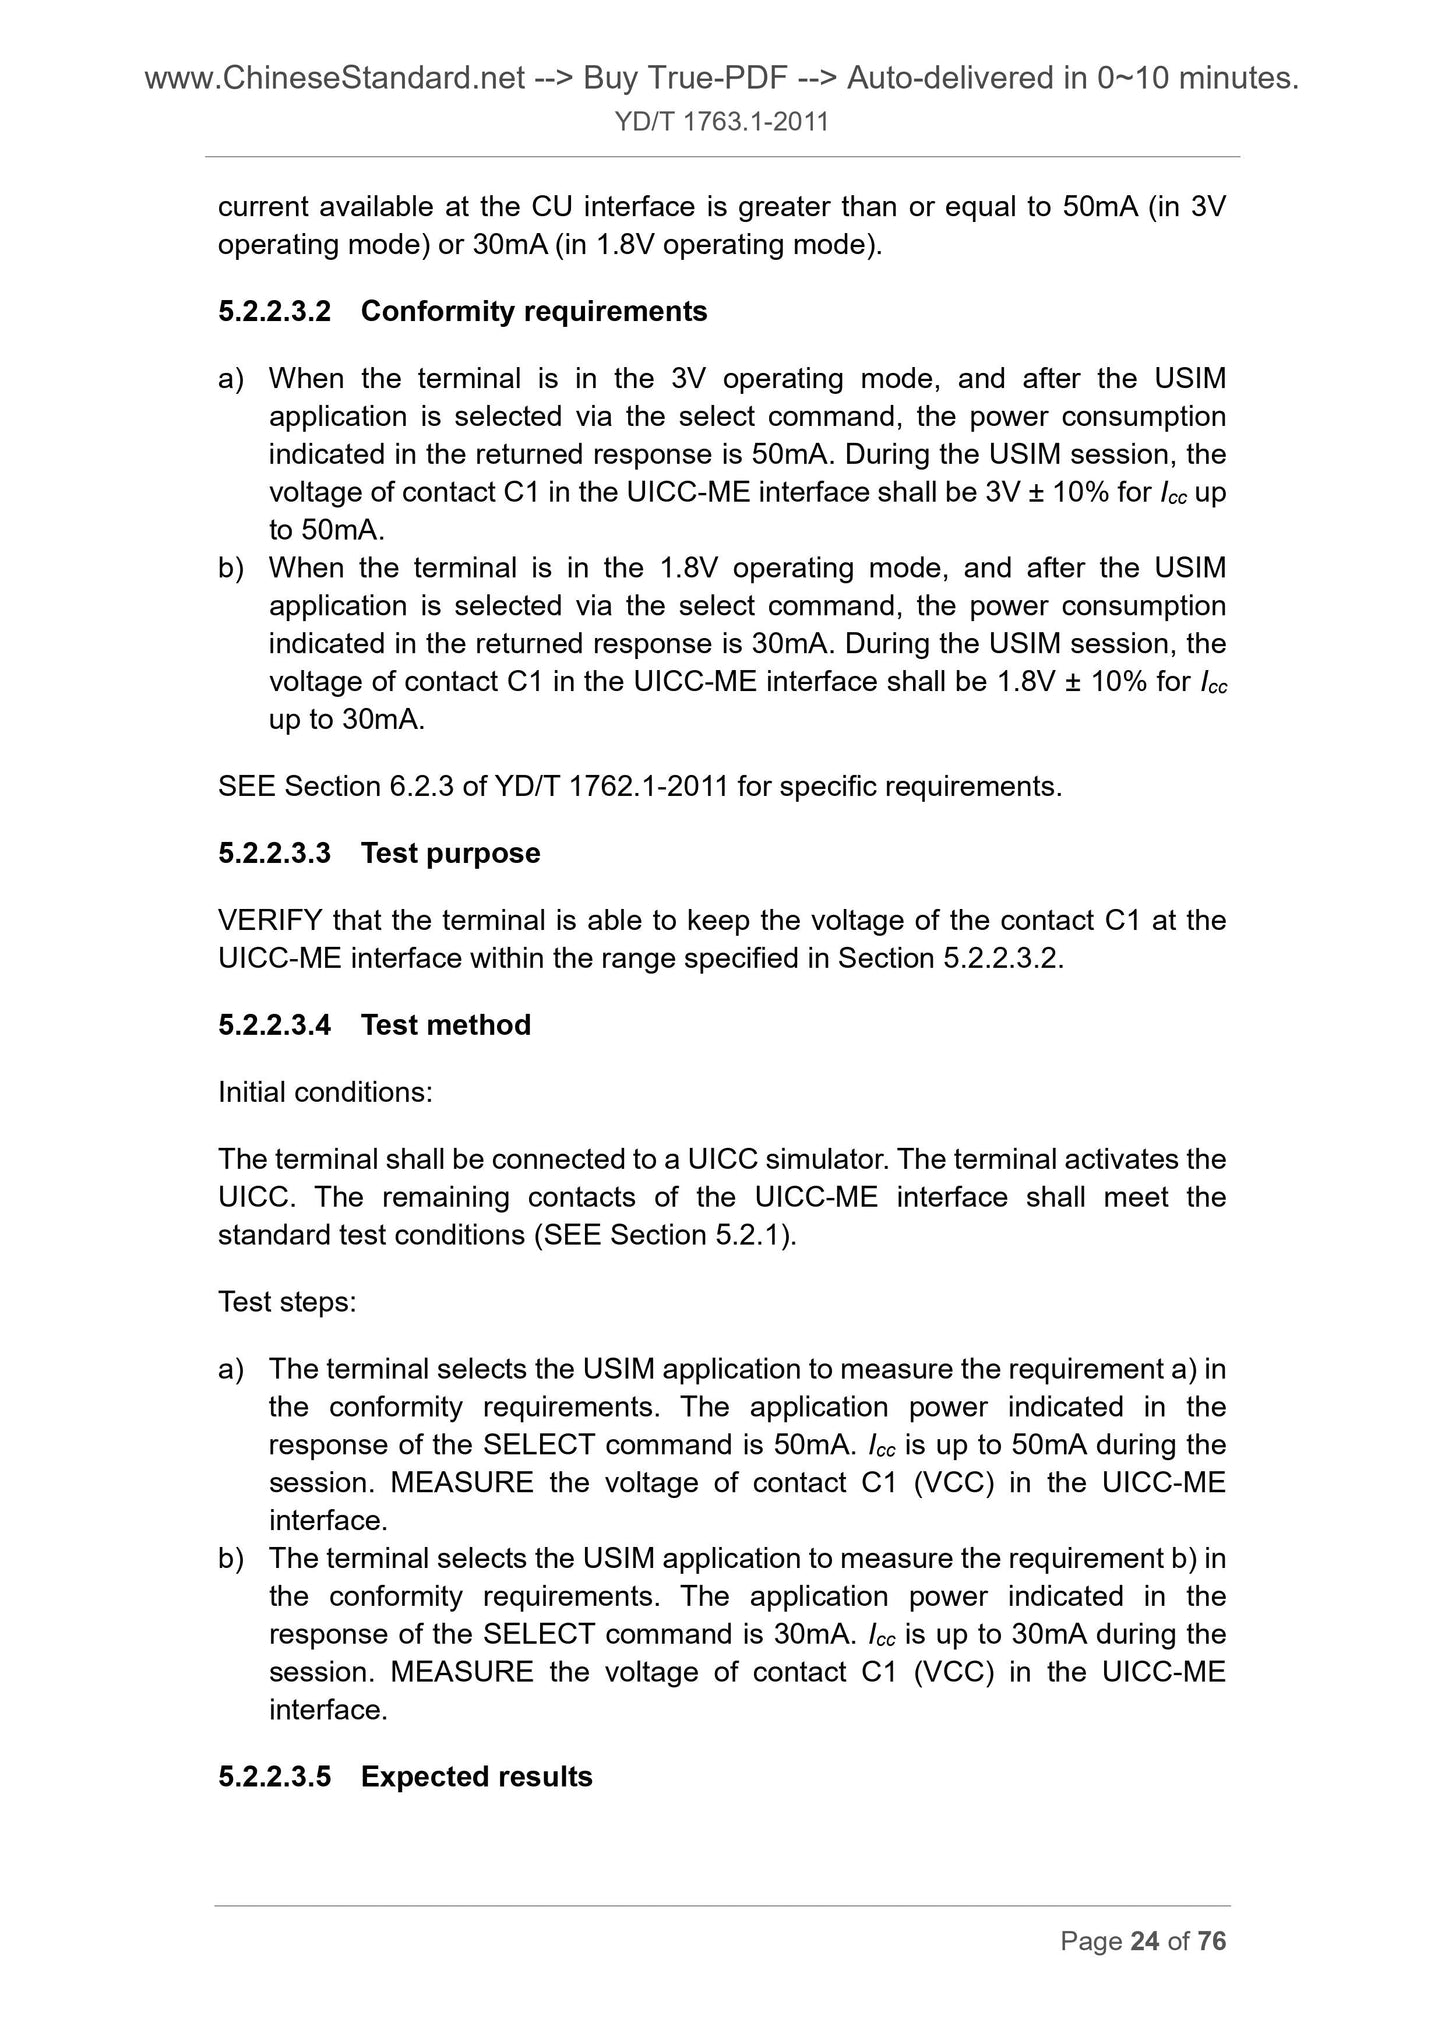 YD/T 1763.1-2011 Page 12